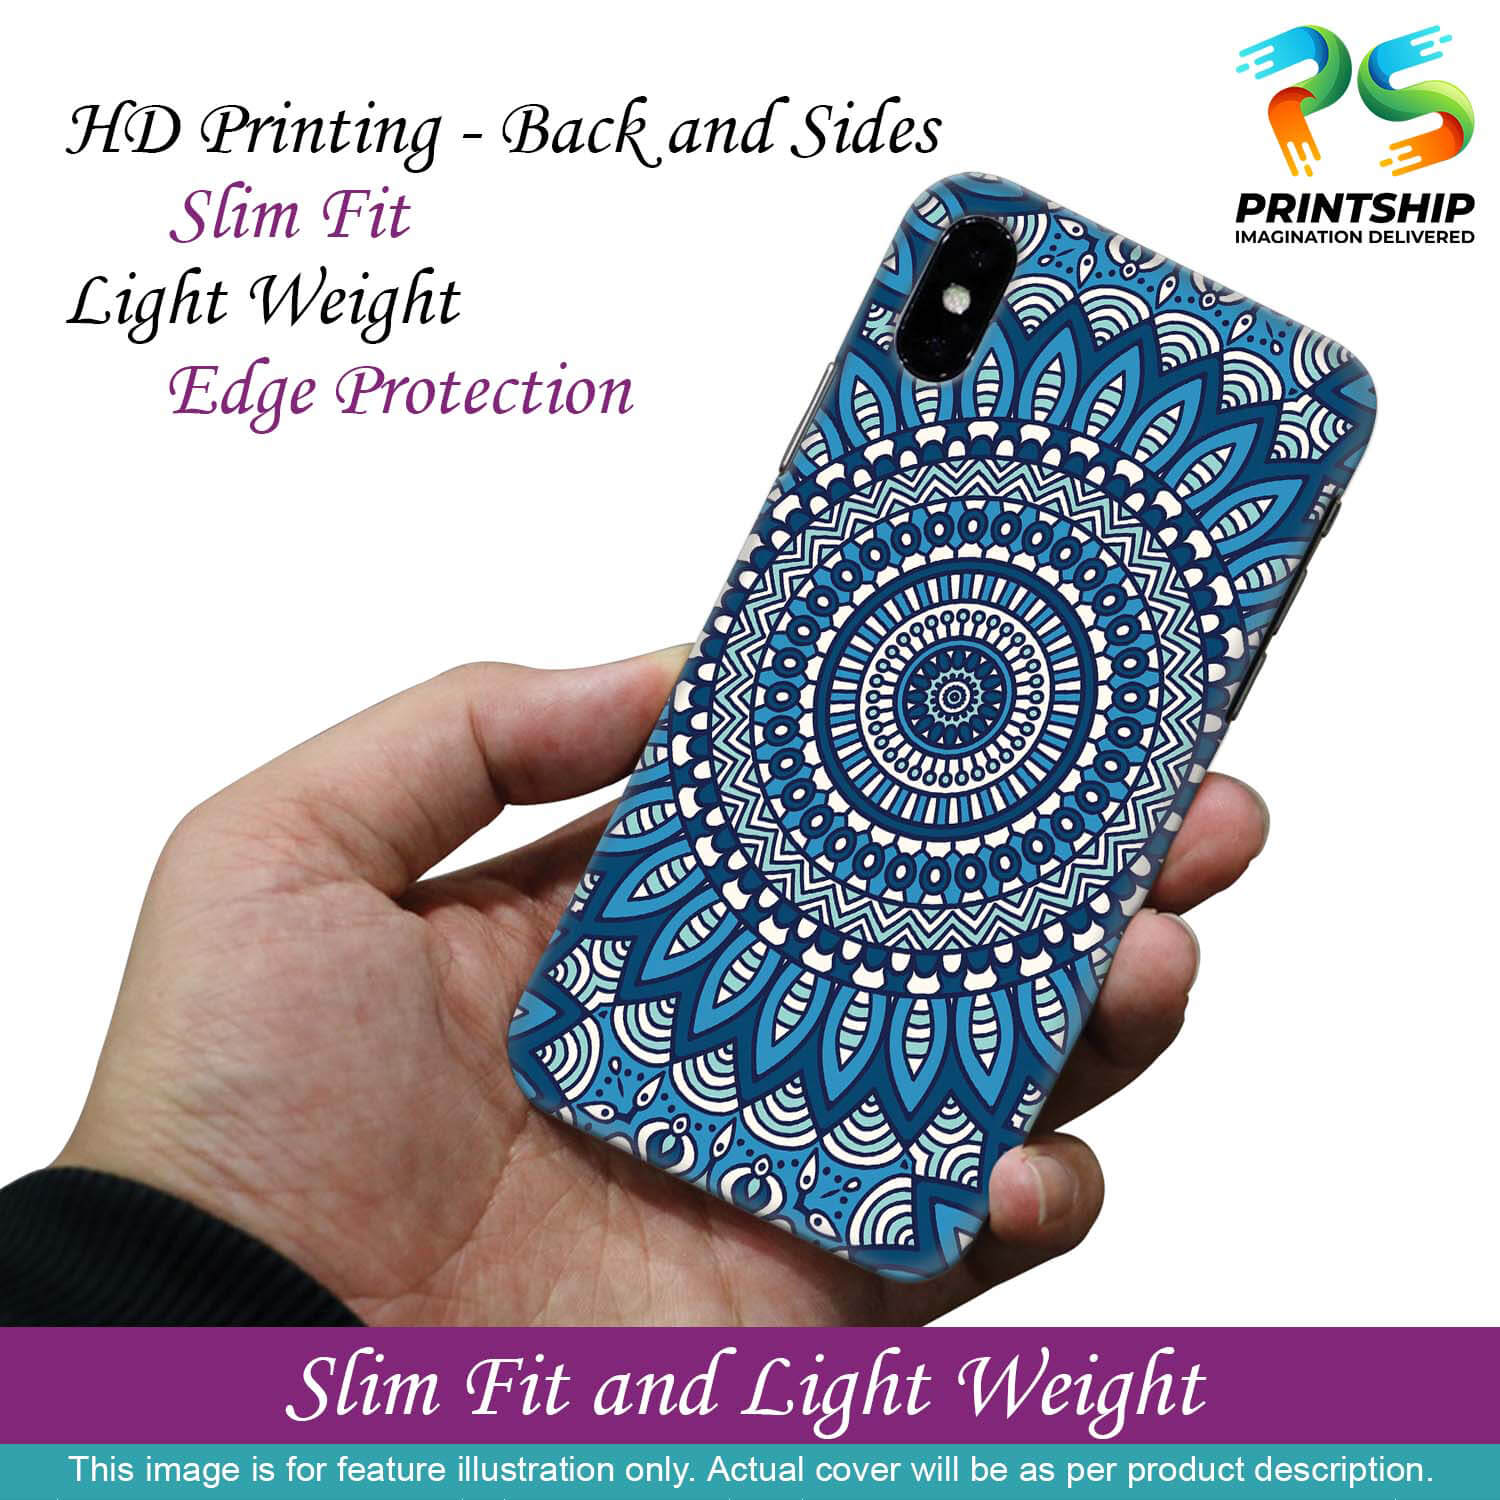 PS1327-Blue Mandala Design Back Cover for Samsung Galaxy A21s